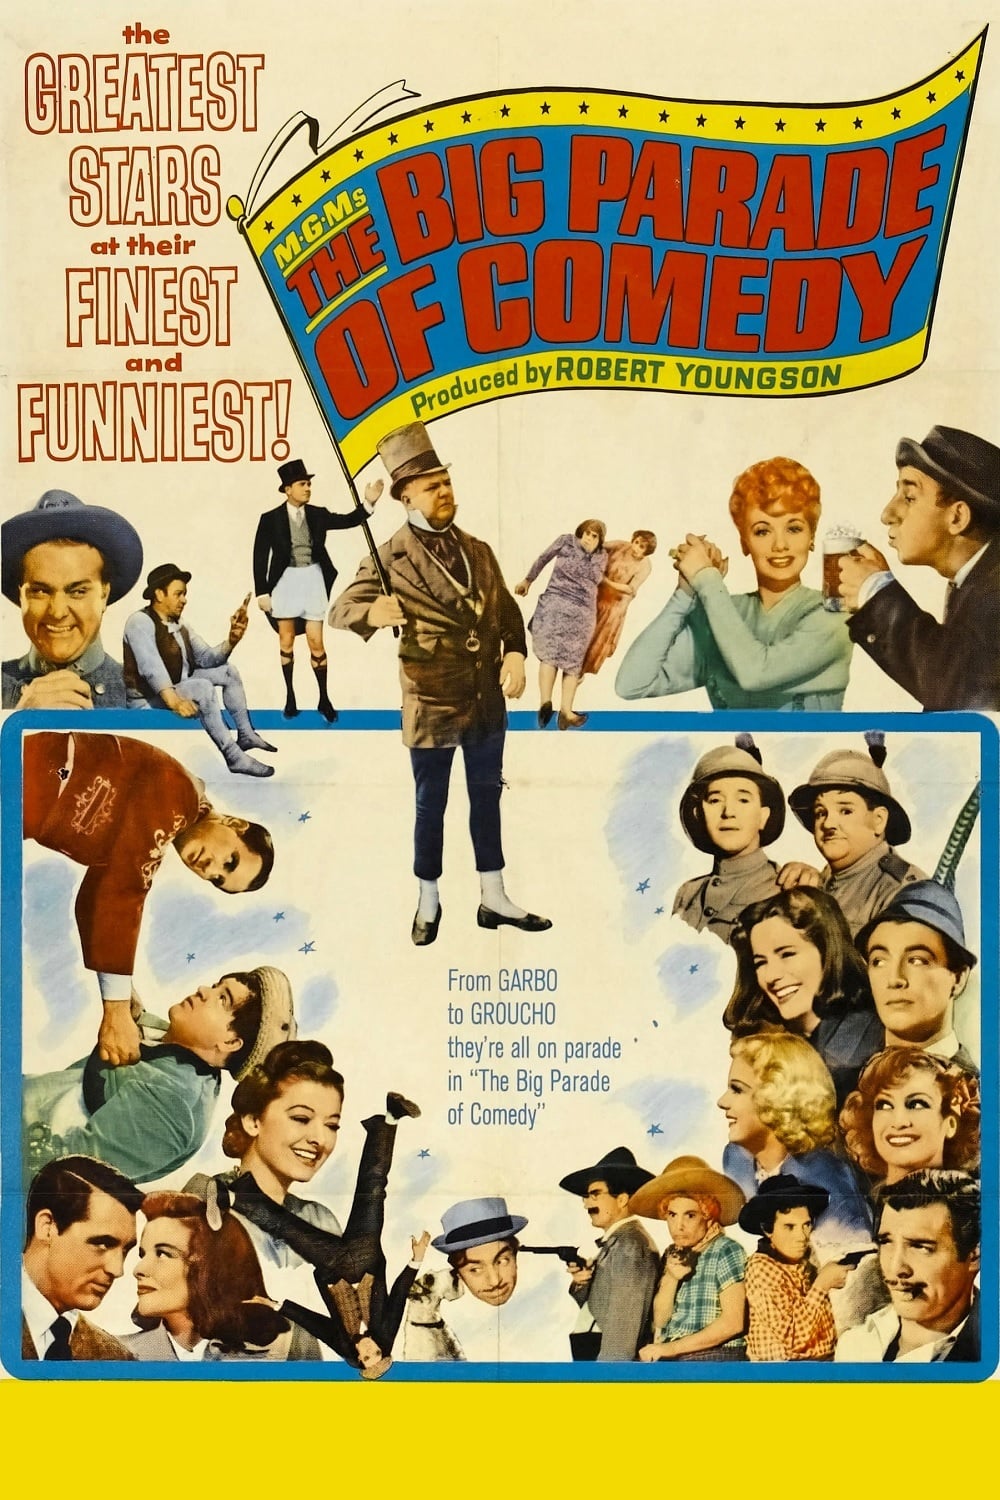 Poster for the movie "The Big Parade of Comedy"